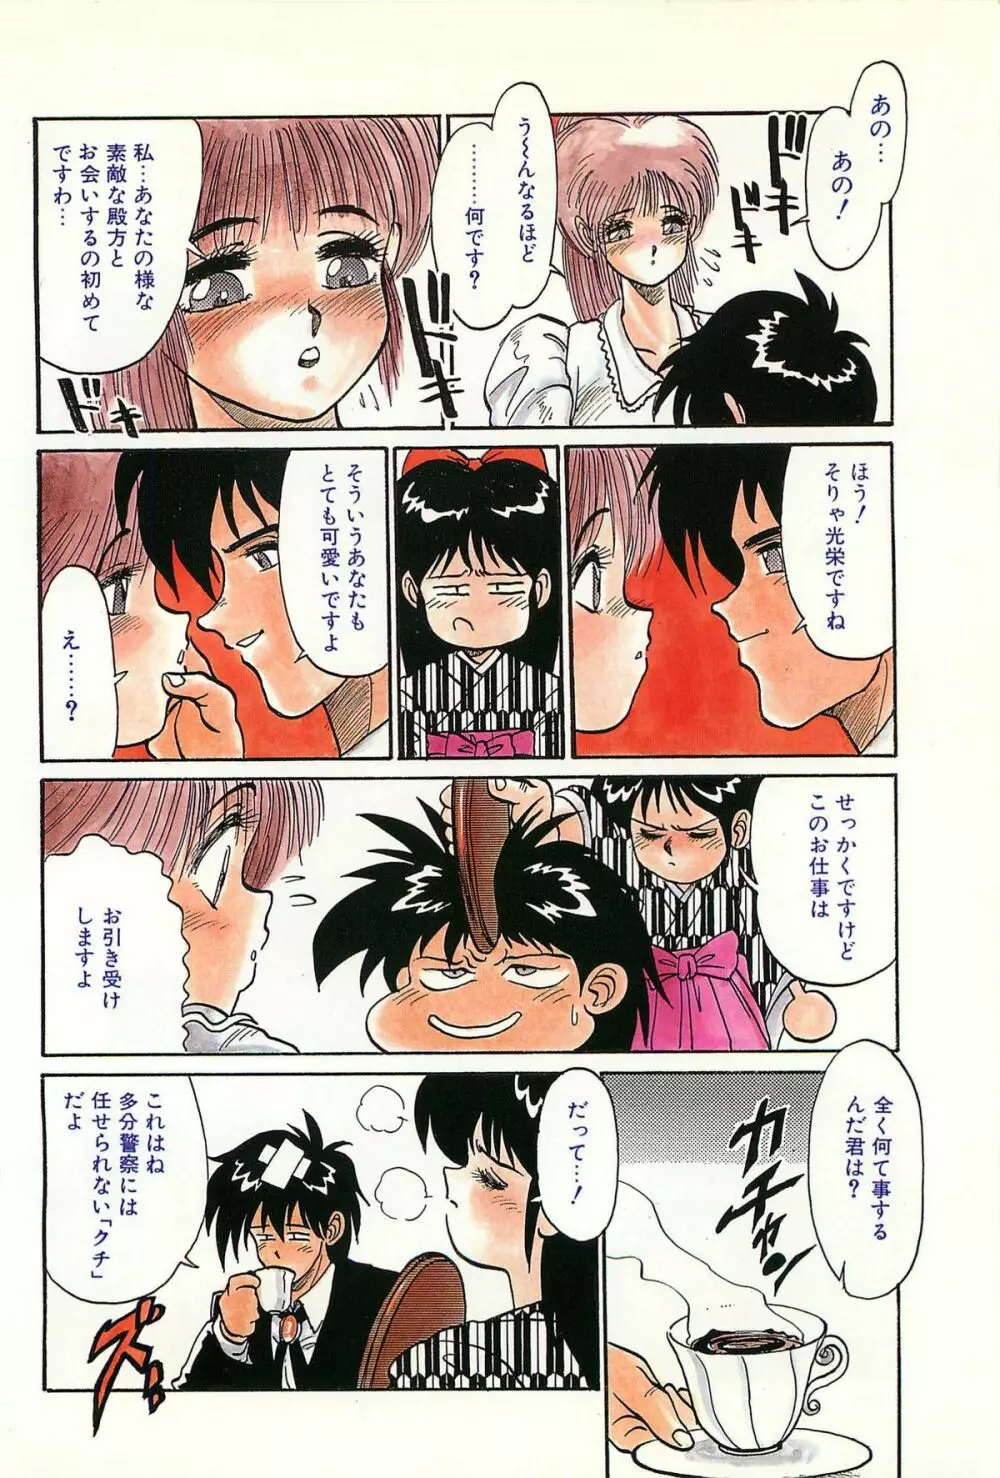 LOVE ME 1995 Page.108